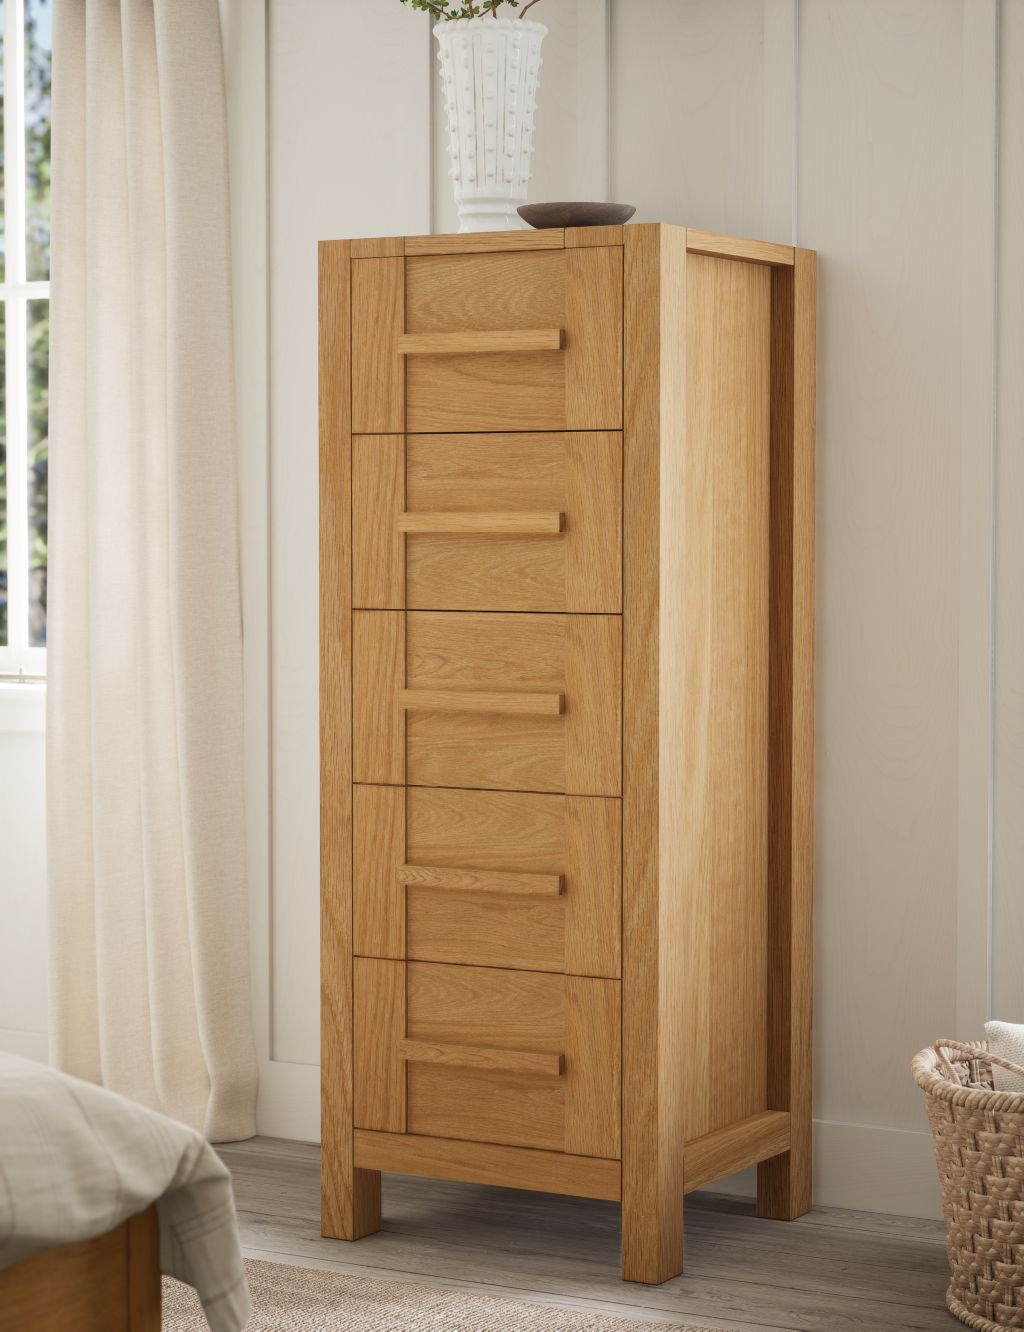 Sonoma™ Tall 5 Drawer Chest image 1